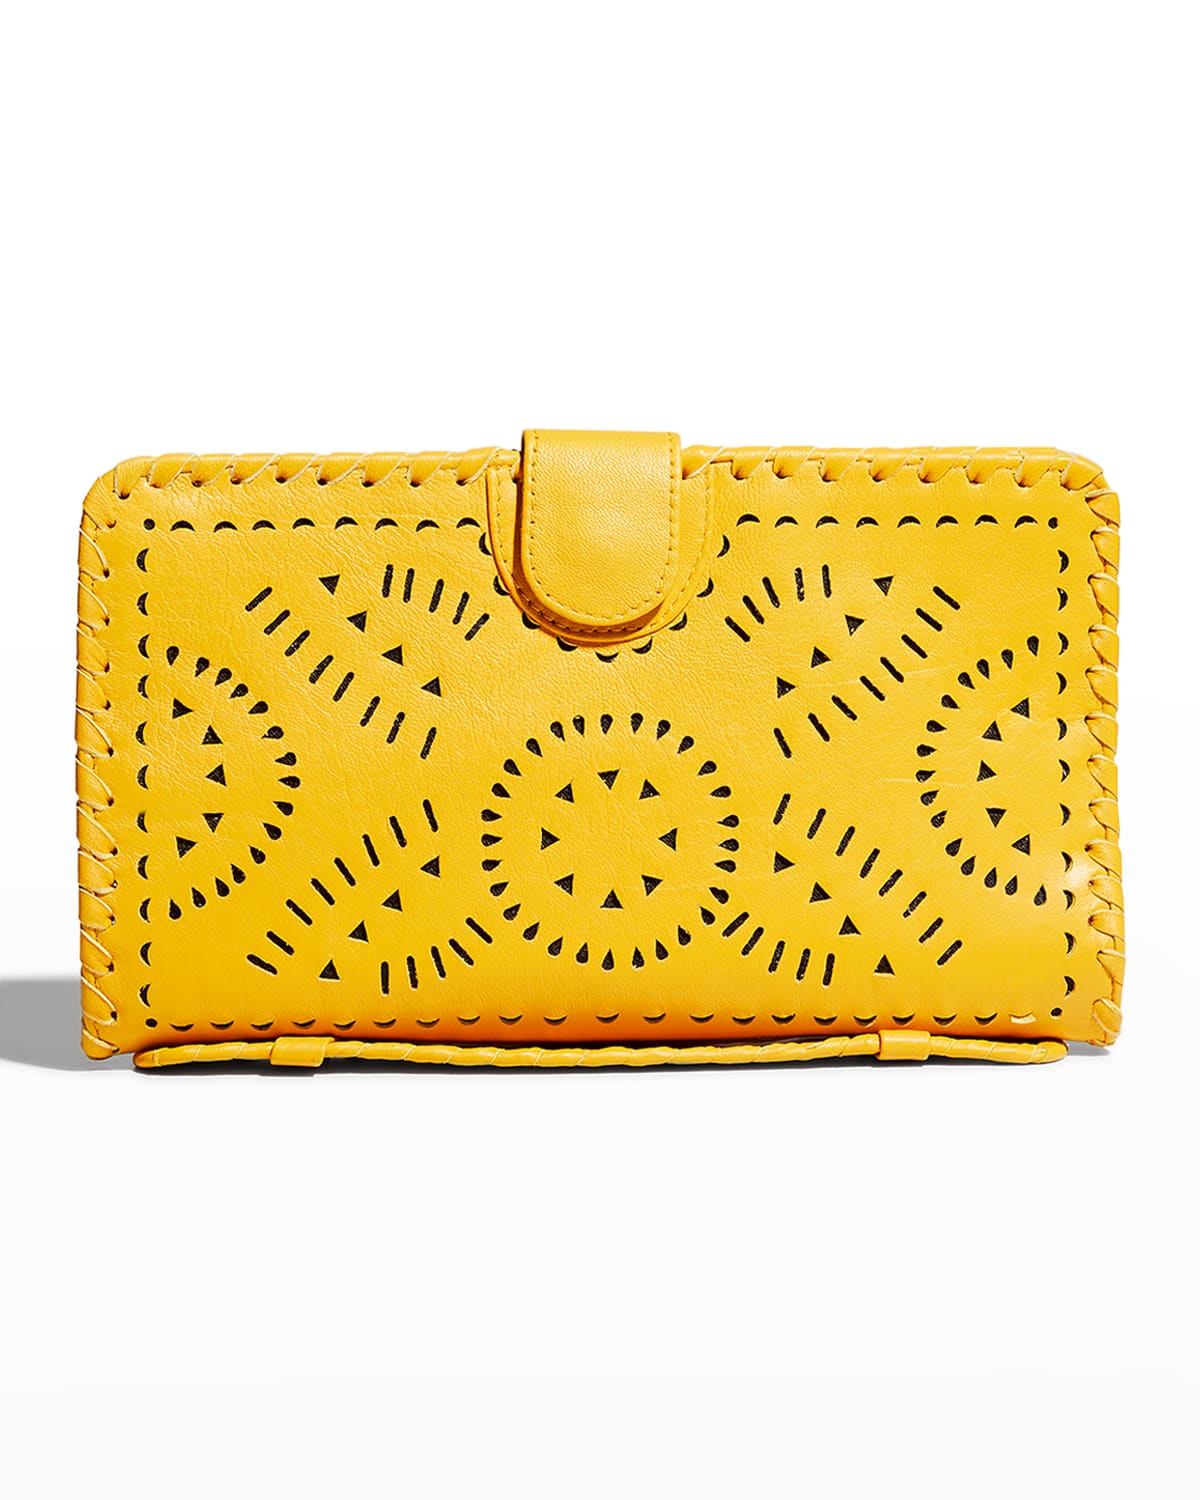 Cleobella Mexicana Perforated Leather Clutch Bag In Yellow